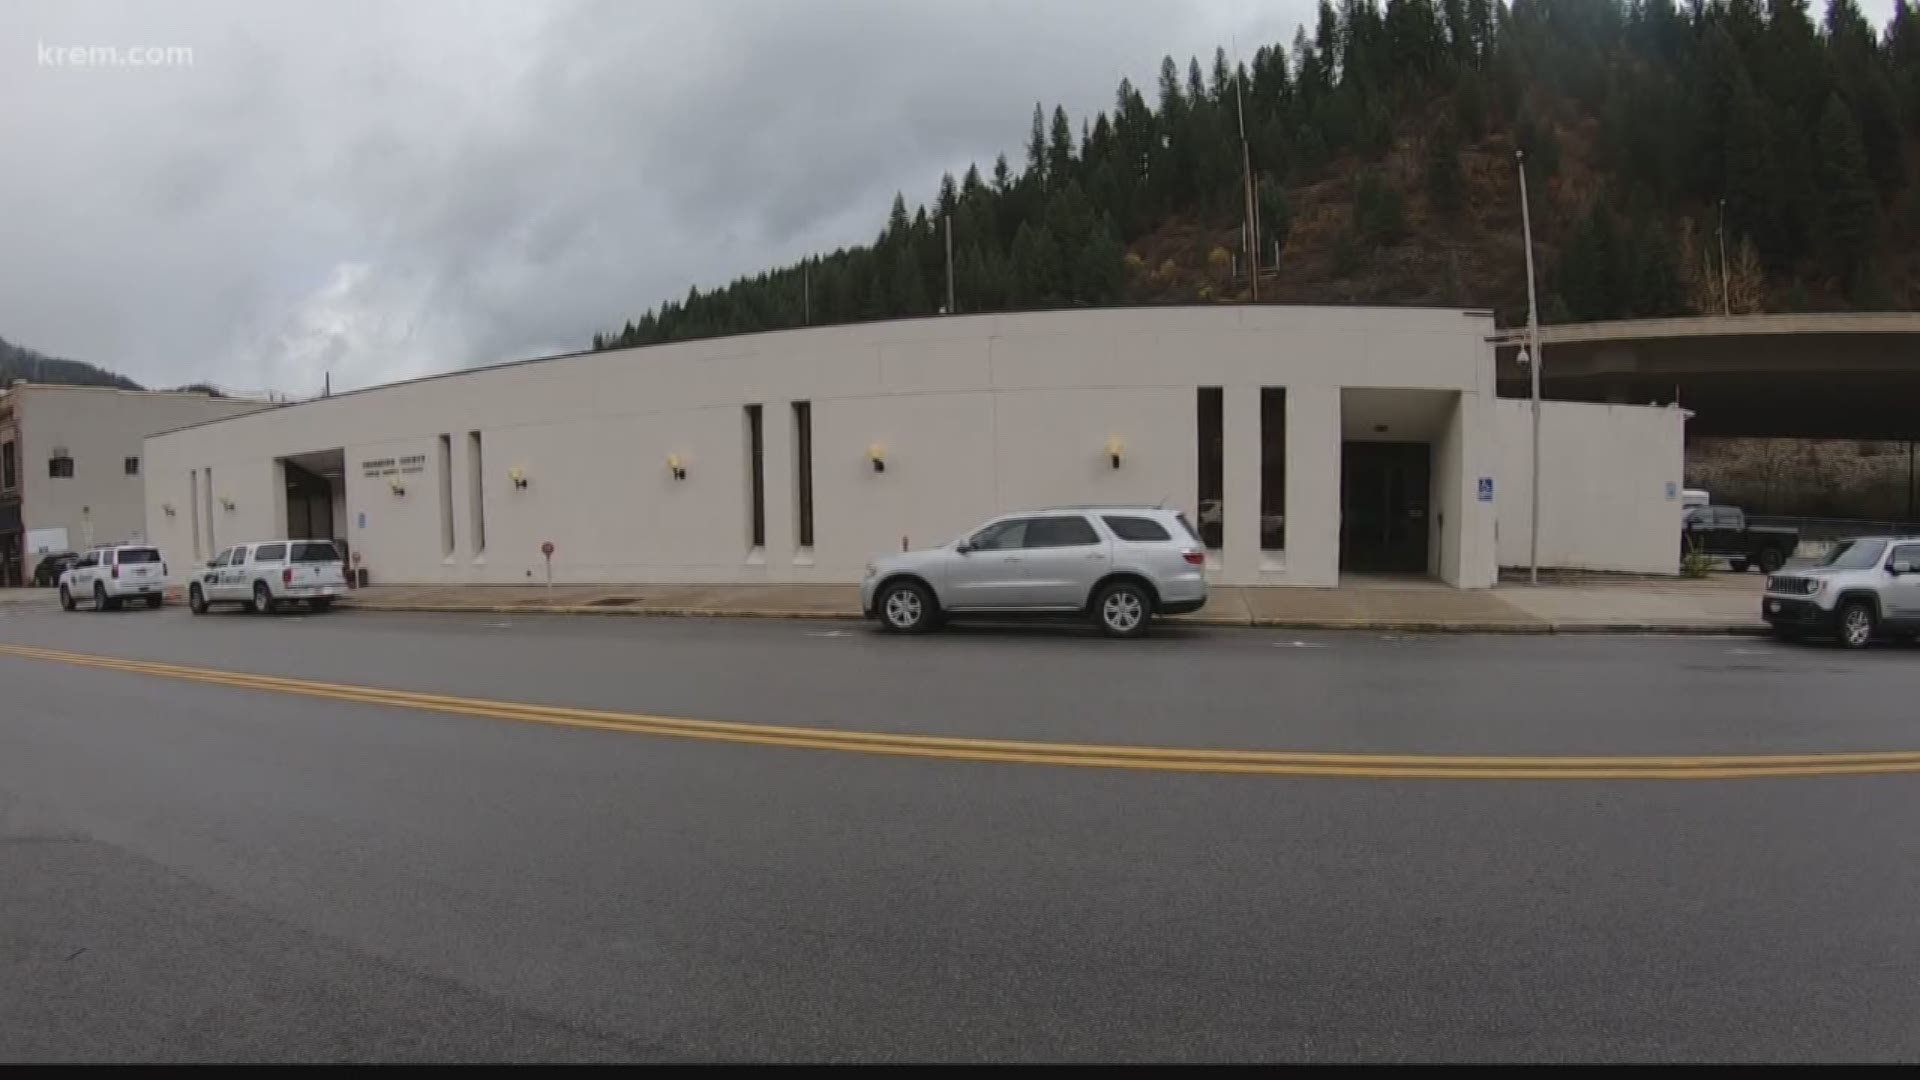 Taxpayers in Shoshone County will vote on a $22 million bond that would replace the rundown building housing the jail.